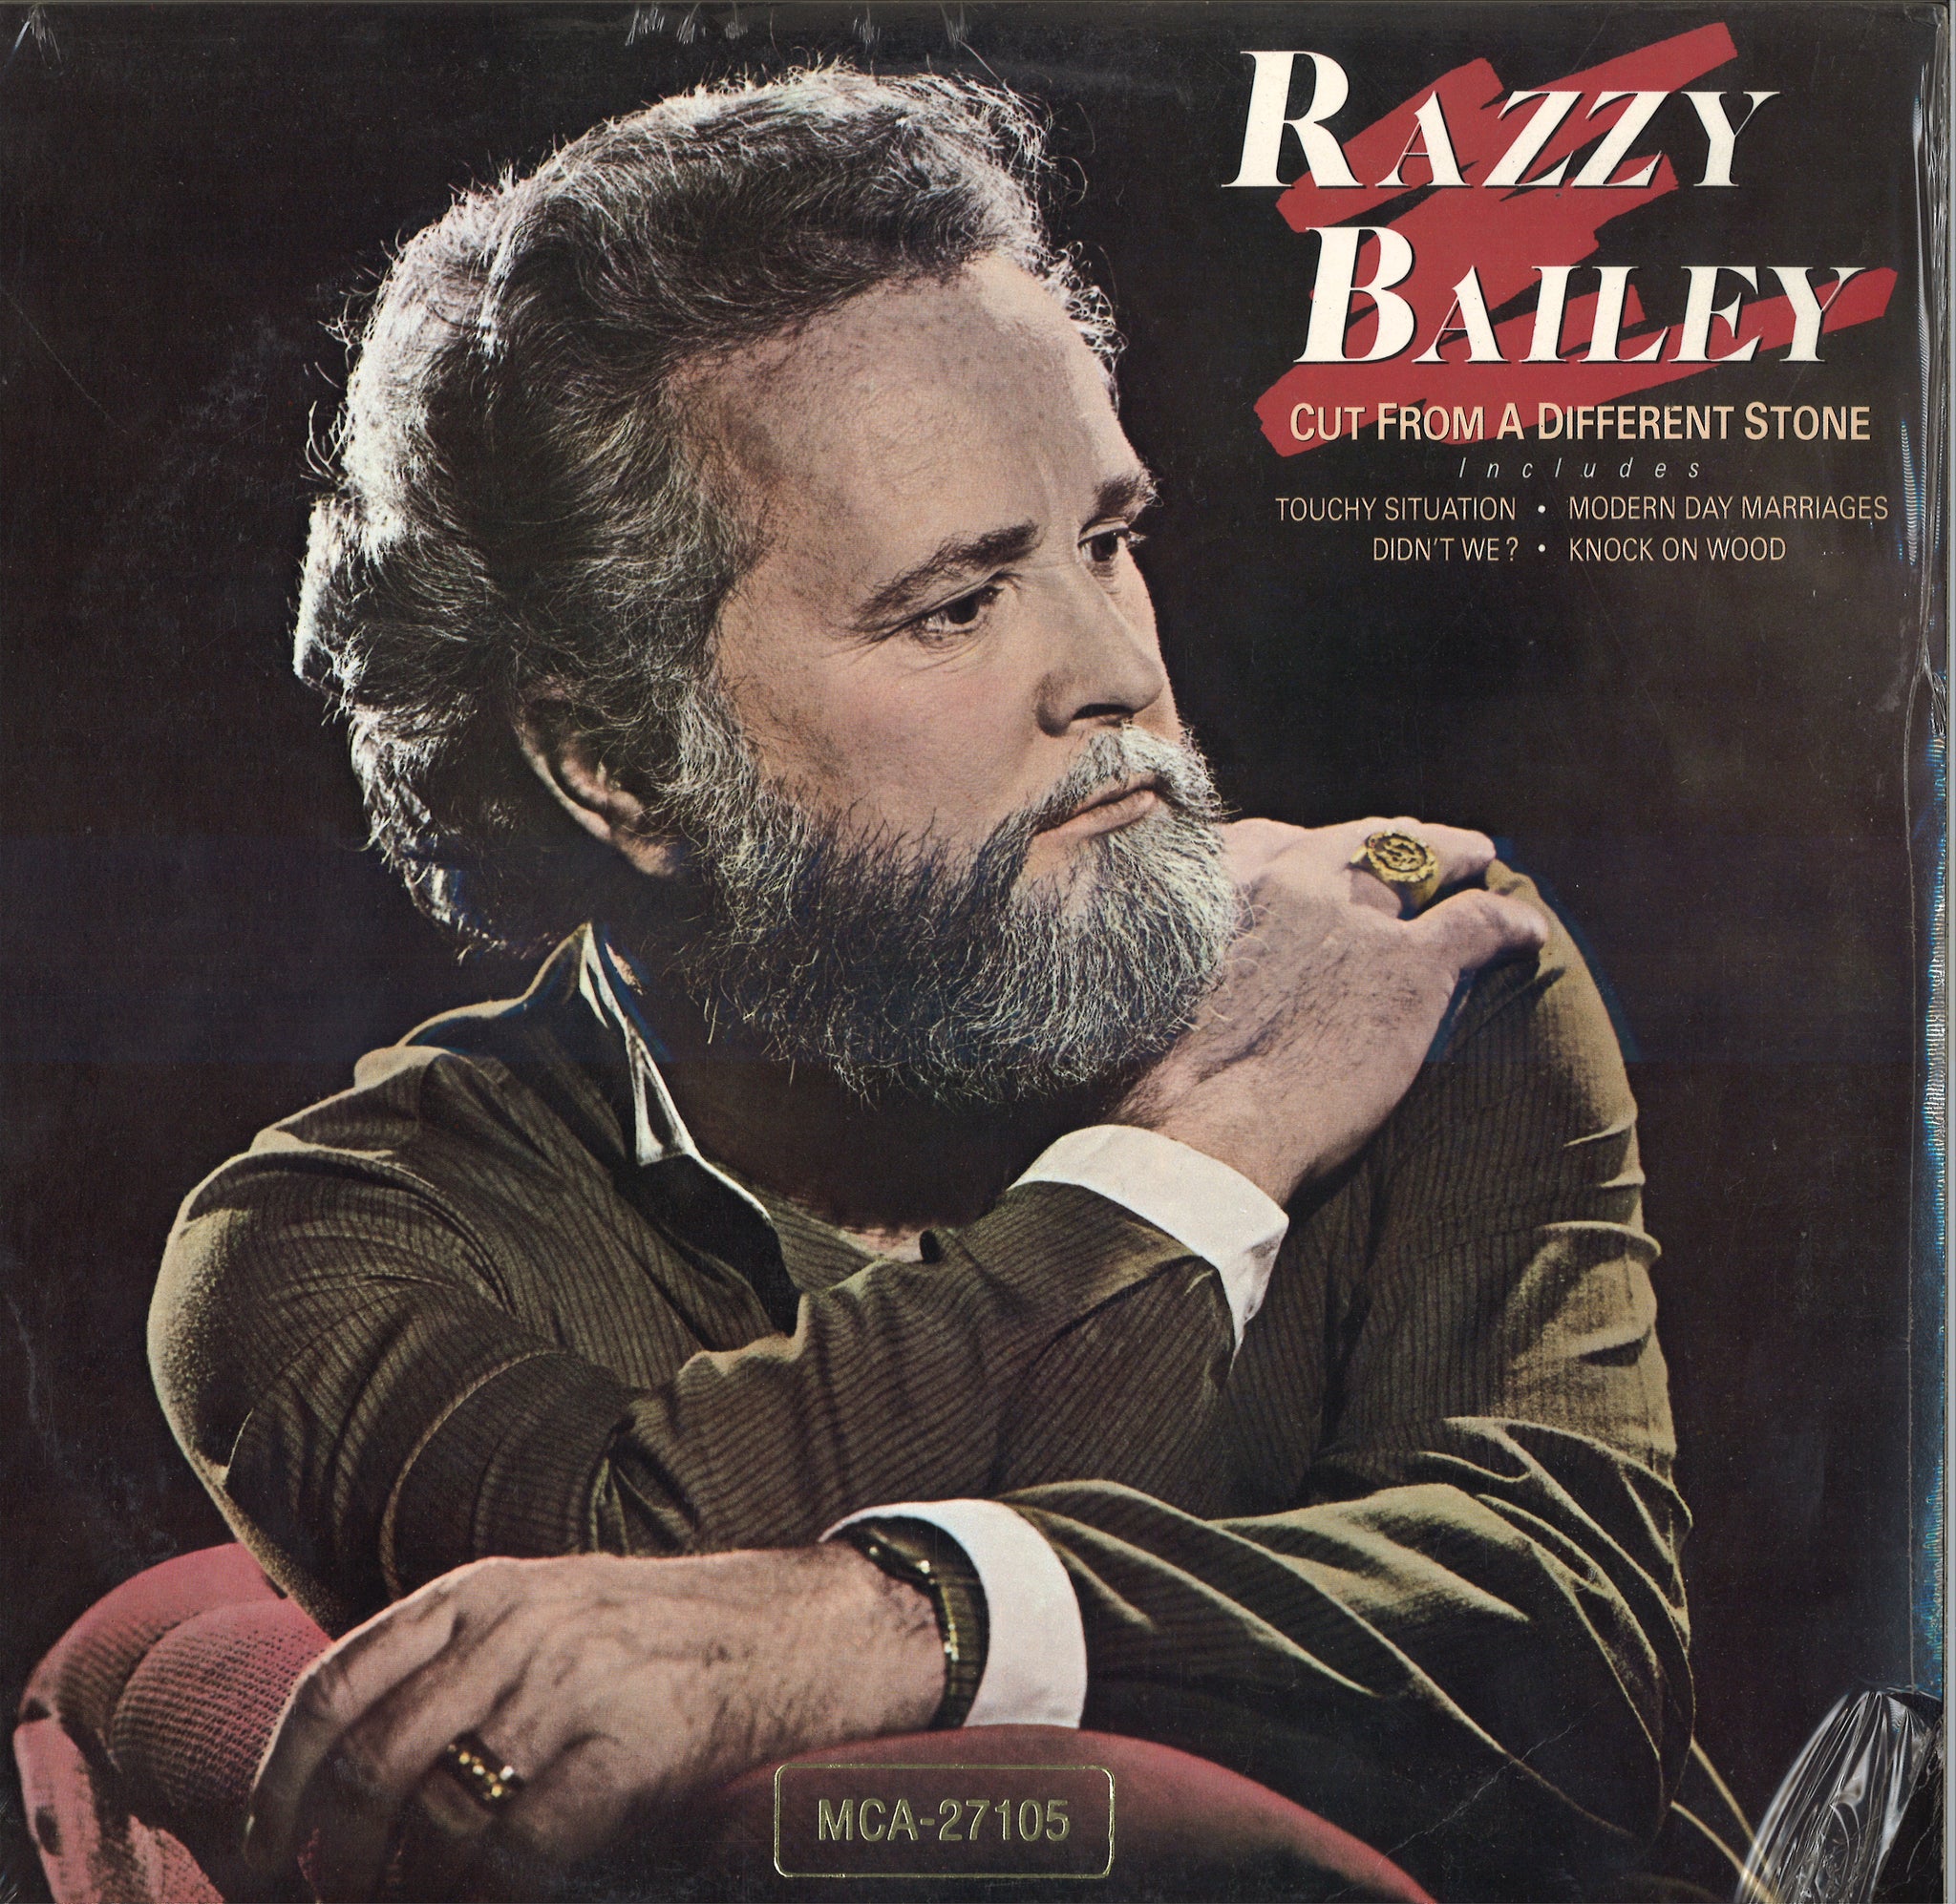 Razzy Bailey Cut From A Different Stone